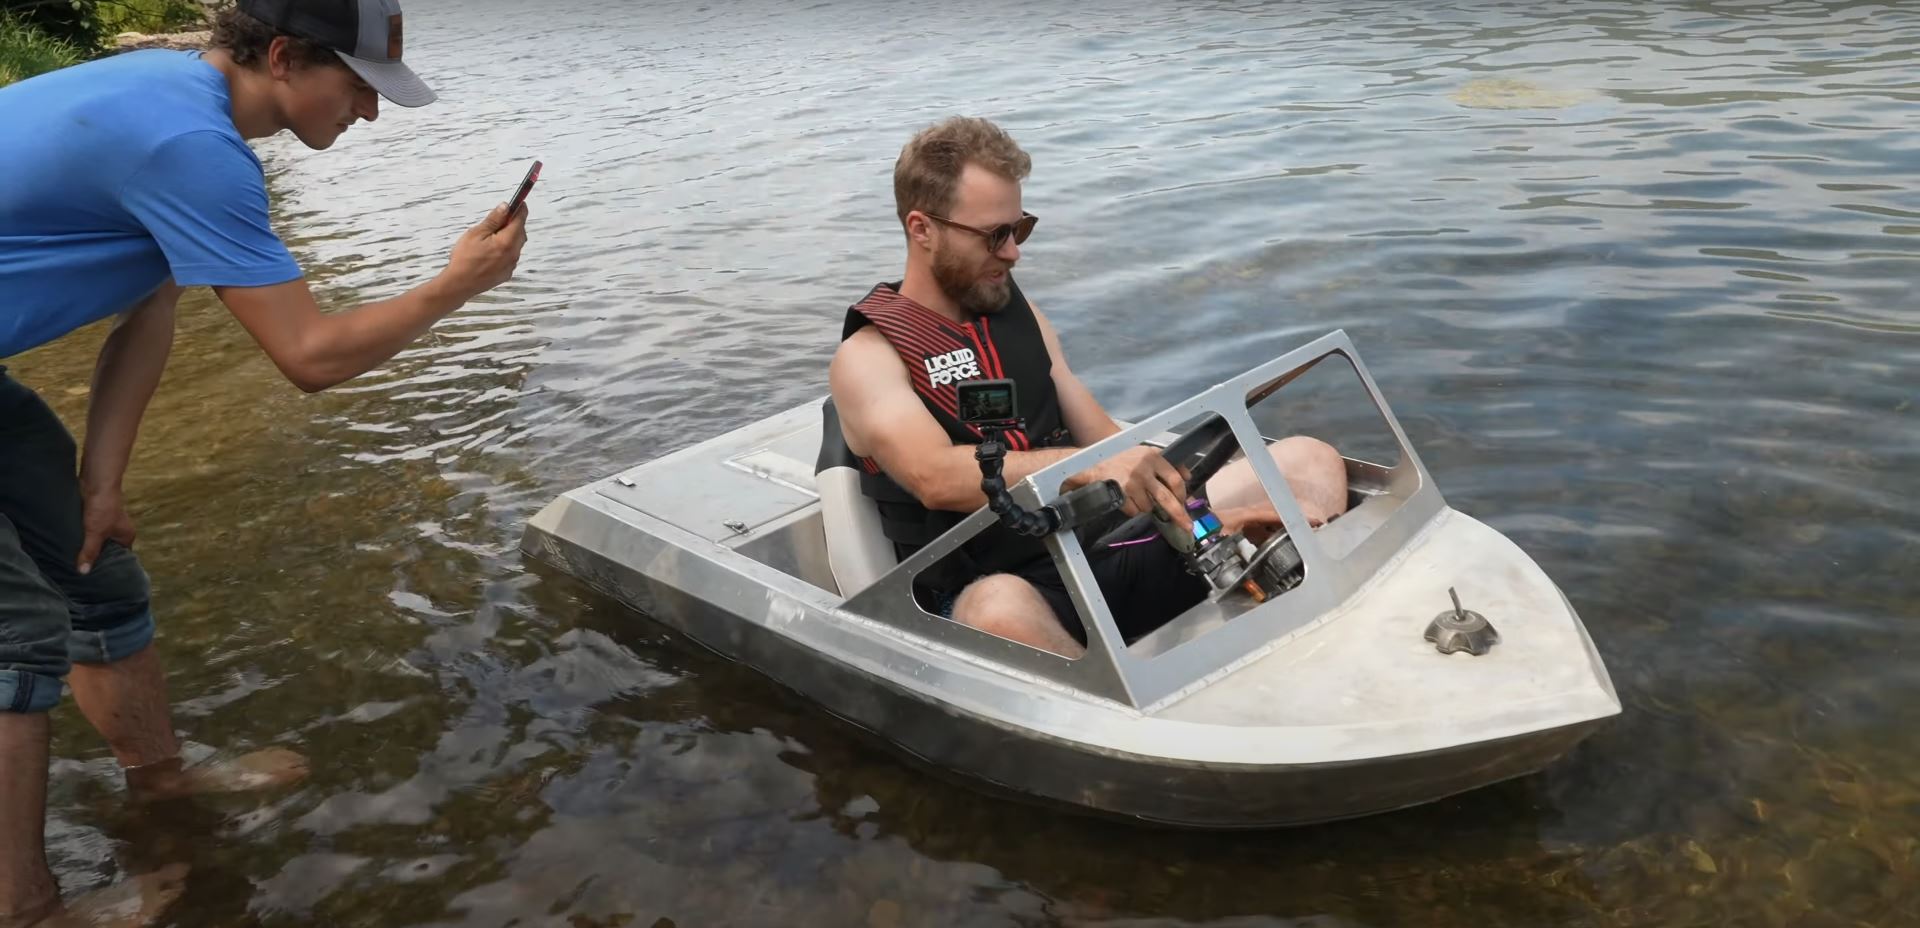 A Tour of my Small, Two Man Boat 